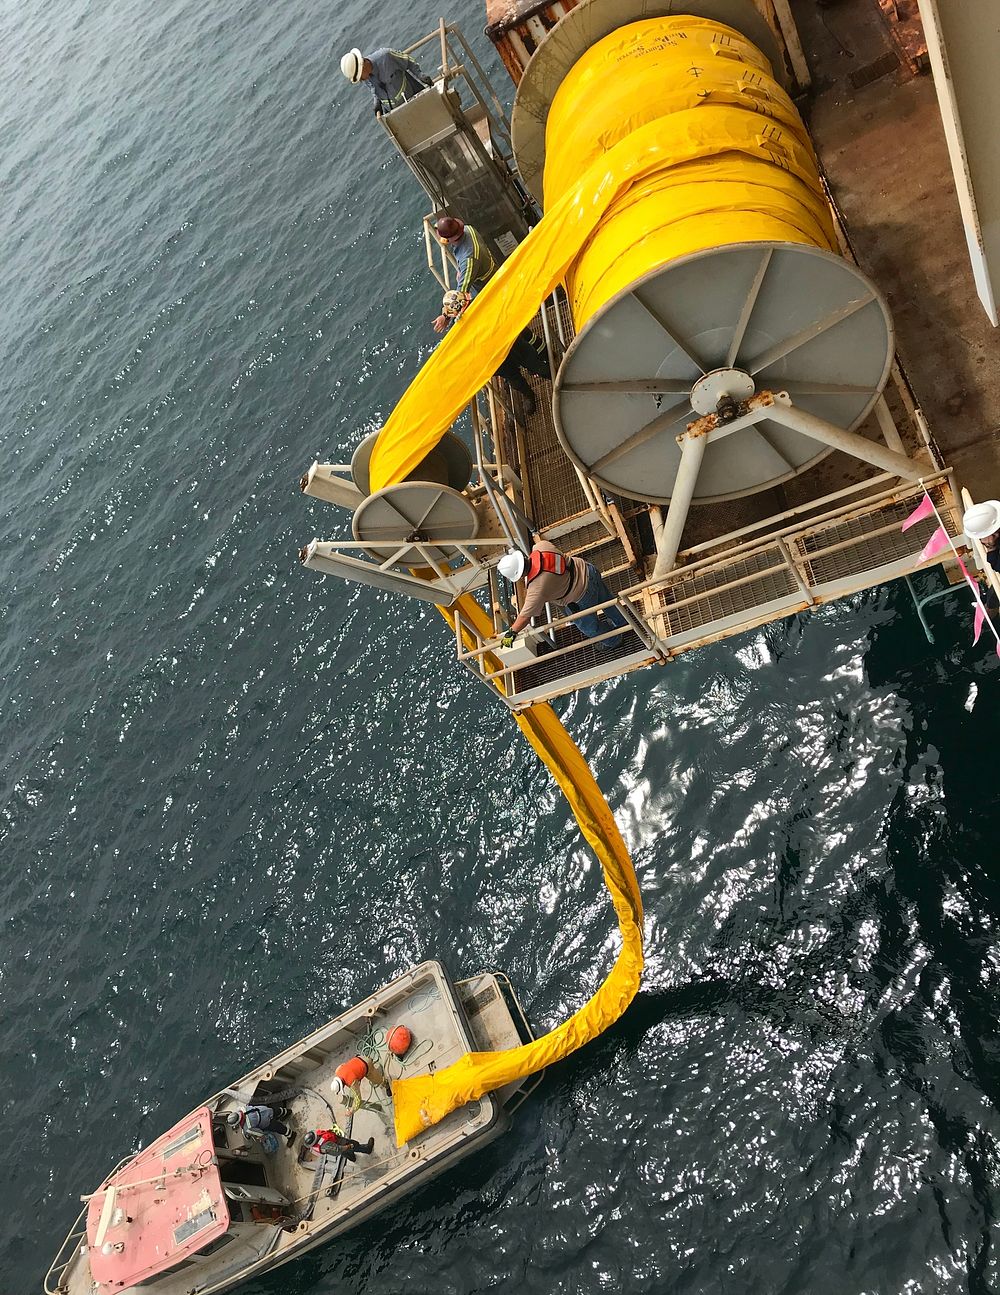 Boom Deployment from Offshore PlatformAugust 22, 2019 Santa Barbara Channel, California A spill response operating team…